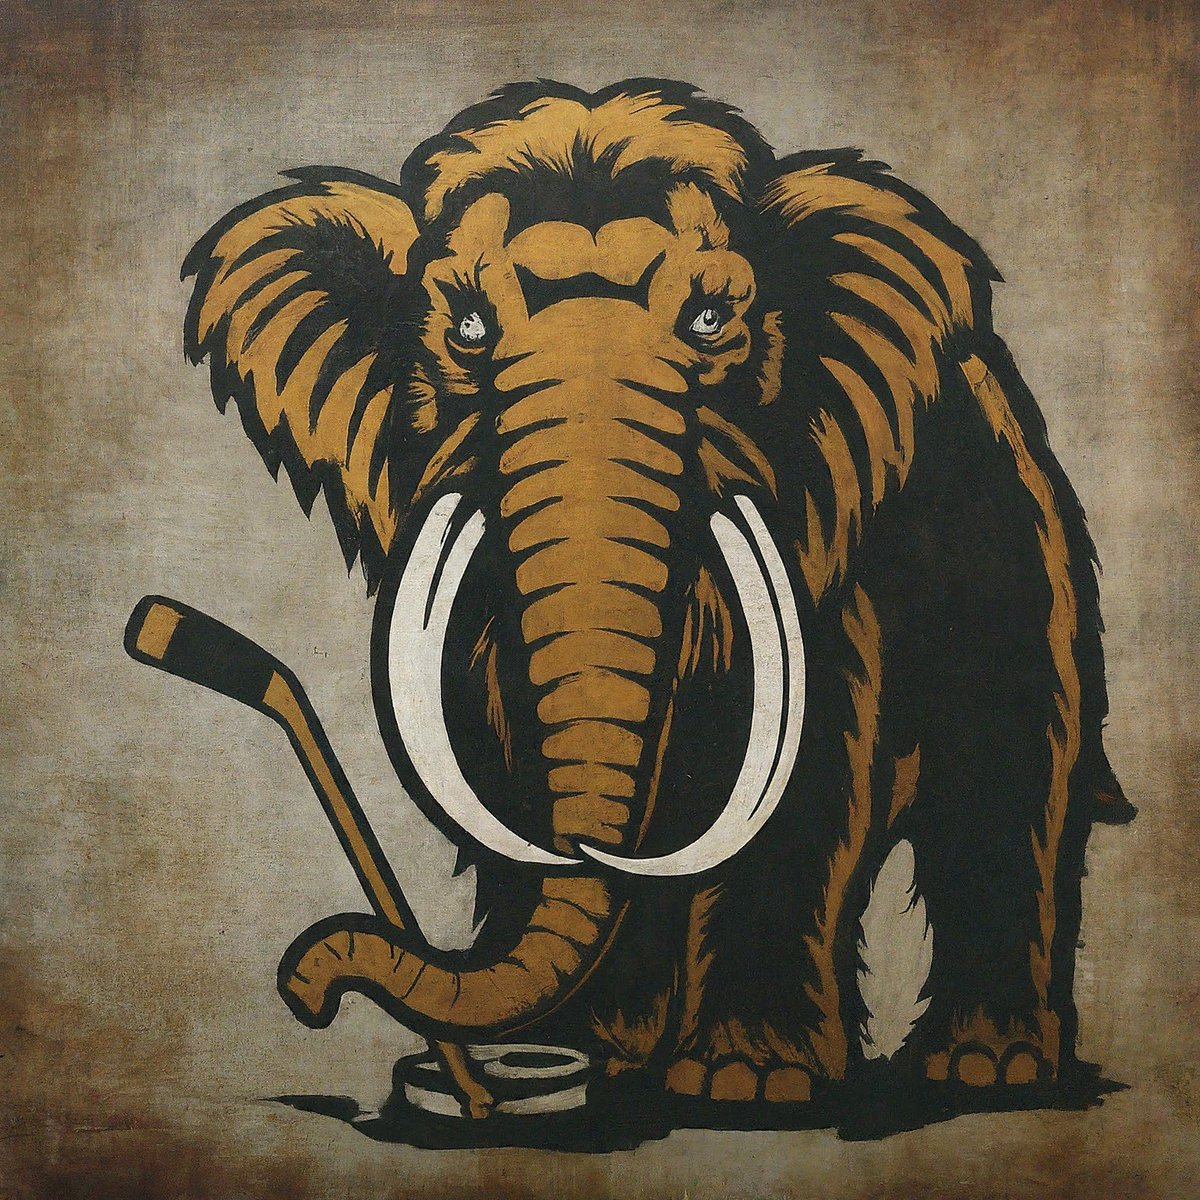 Currently my top choice for the Utah Hockey team is the Mammoth.  Please make it happen! 🙏 #NHLINUTAH